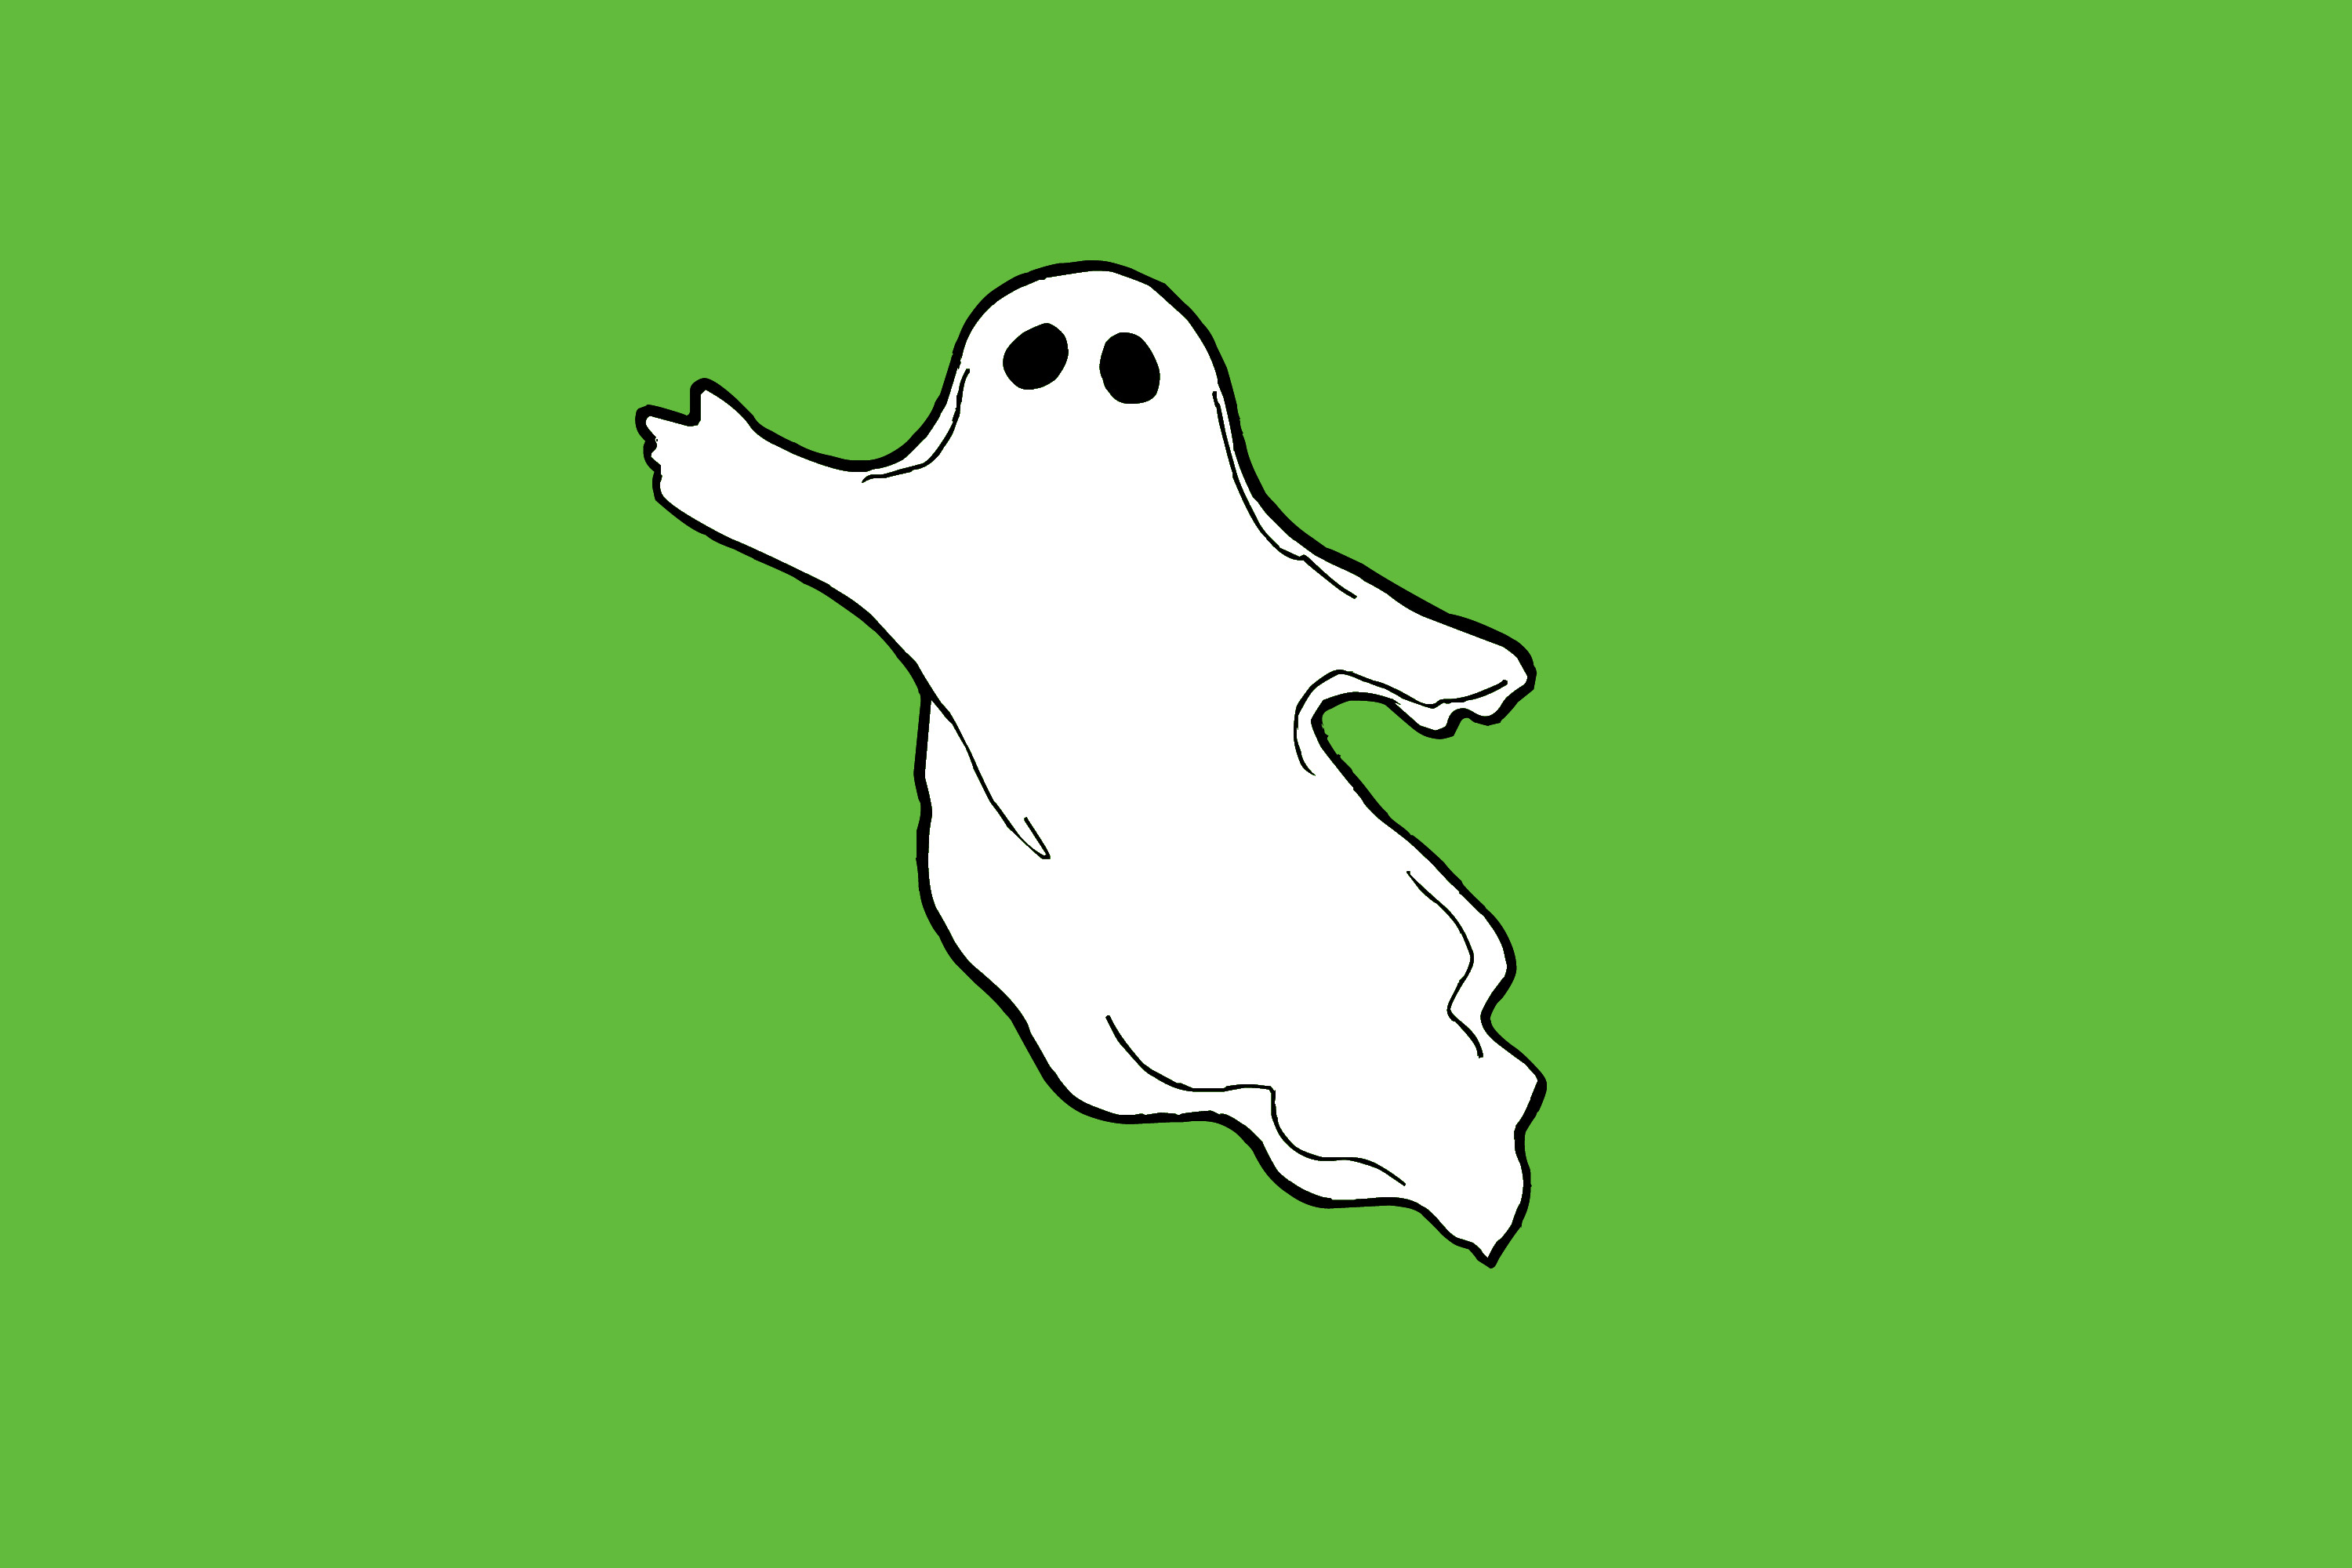 ghost clipart flying